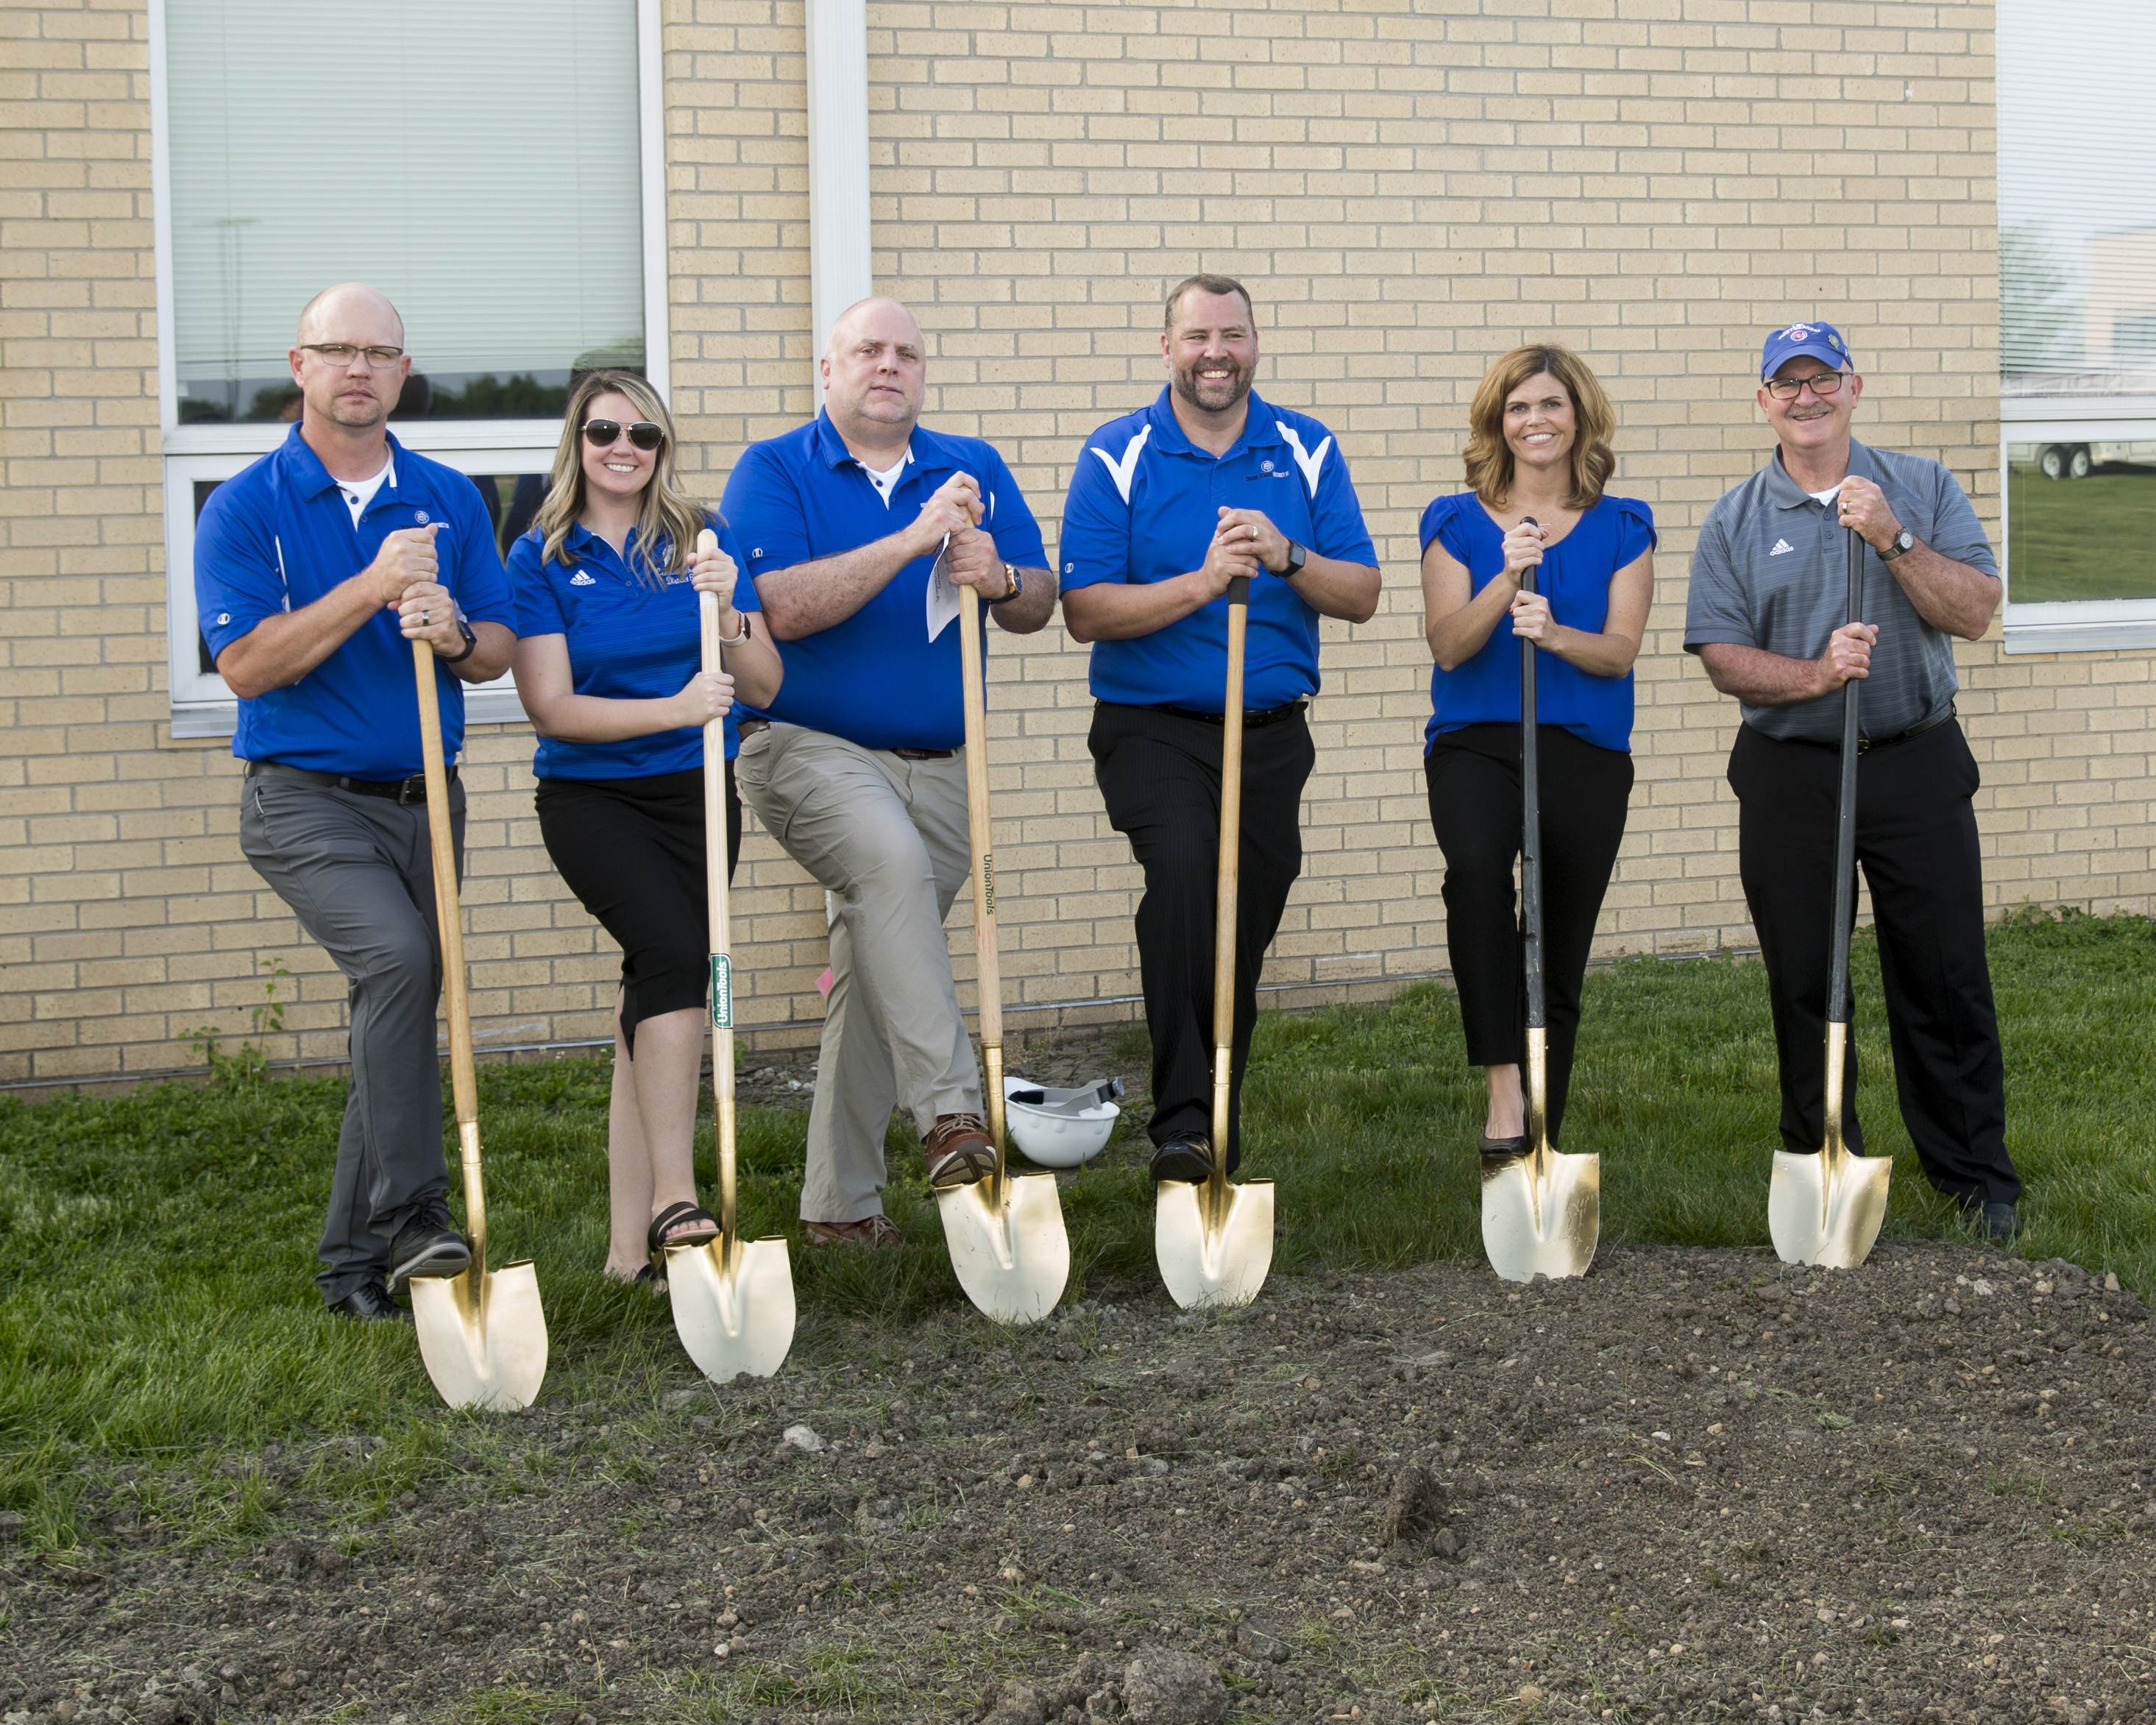 The teachers all wearing a polo blue shirt and posing with a shovel in their hands.